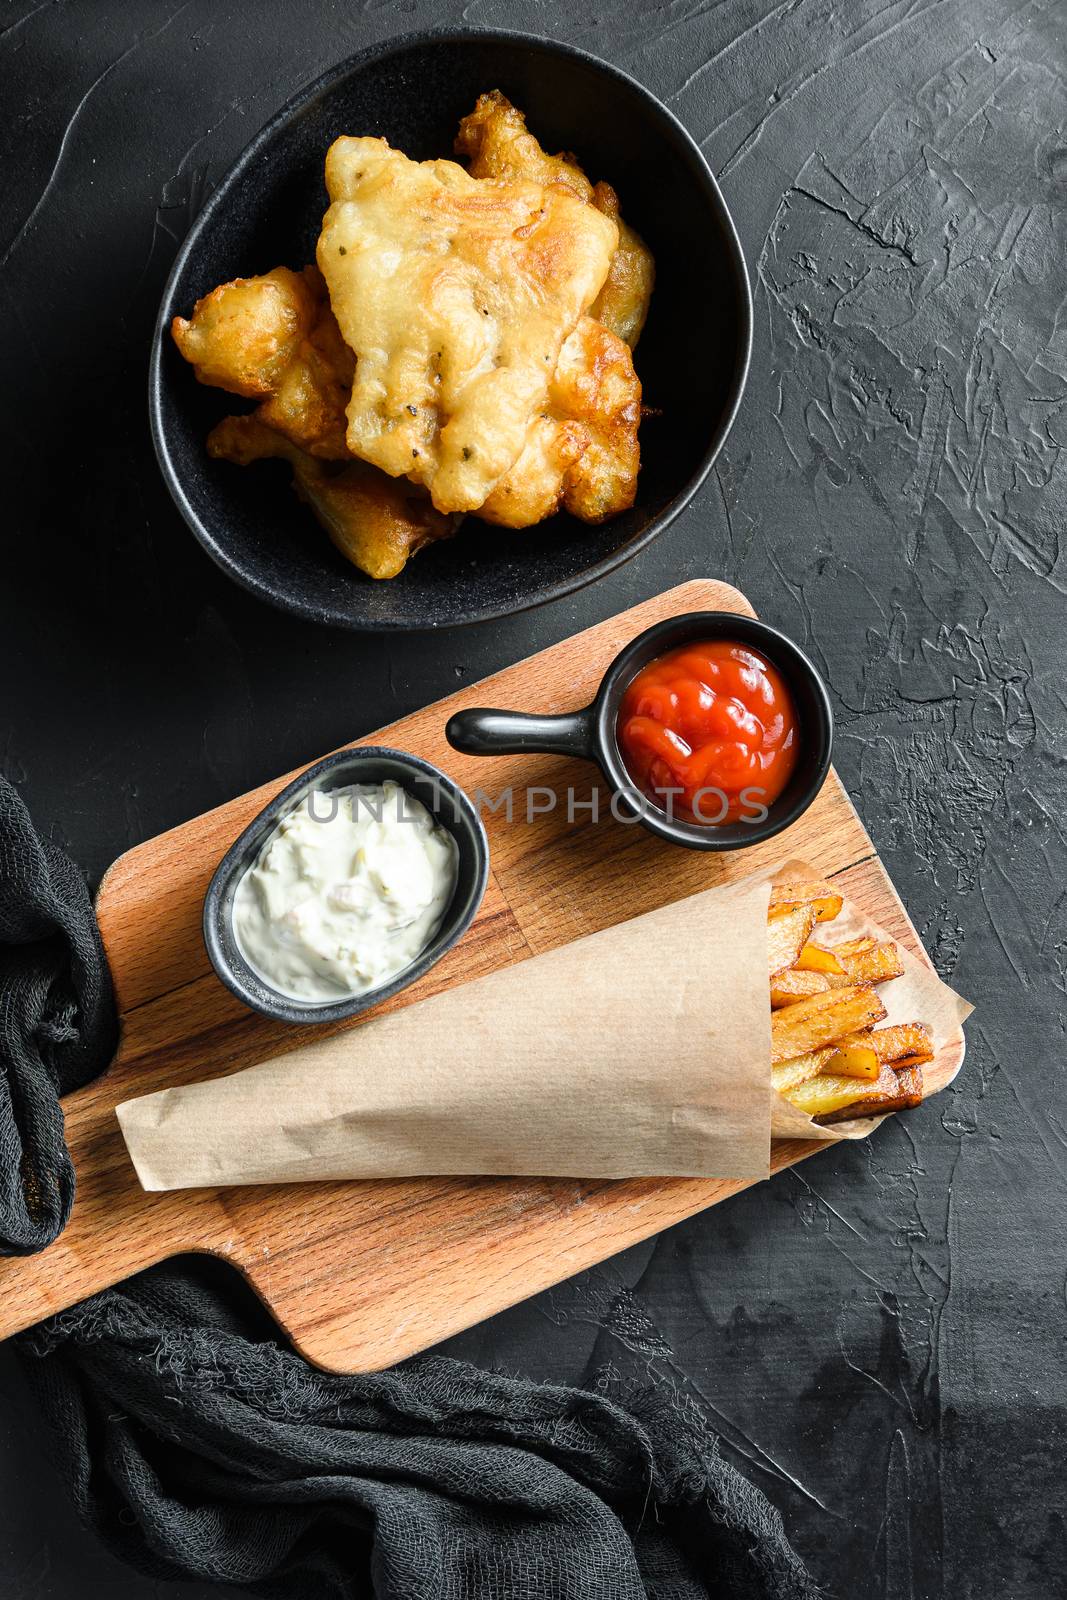 Fish and chips in a paper cone dip and lemon - fried cod, french fries, lemon slices, tartar sauce, ketchup tomatoe and mushy peas over black background top view vertical.